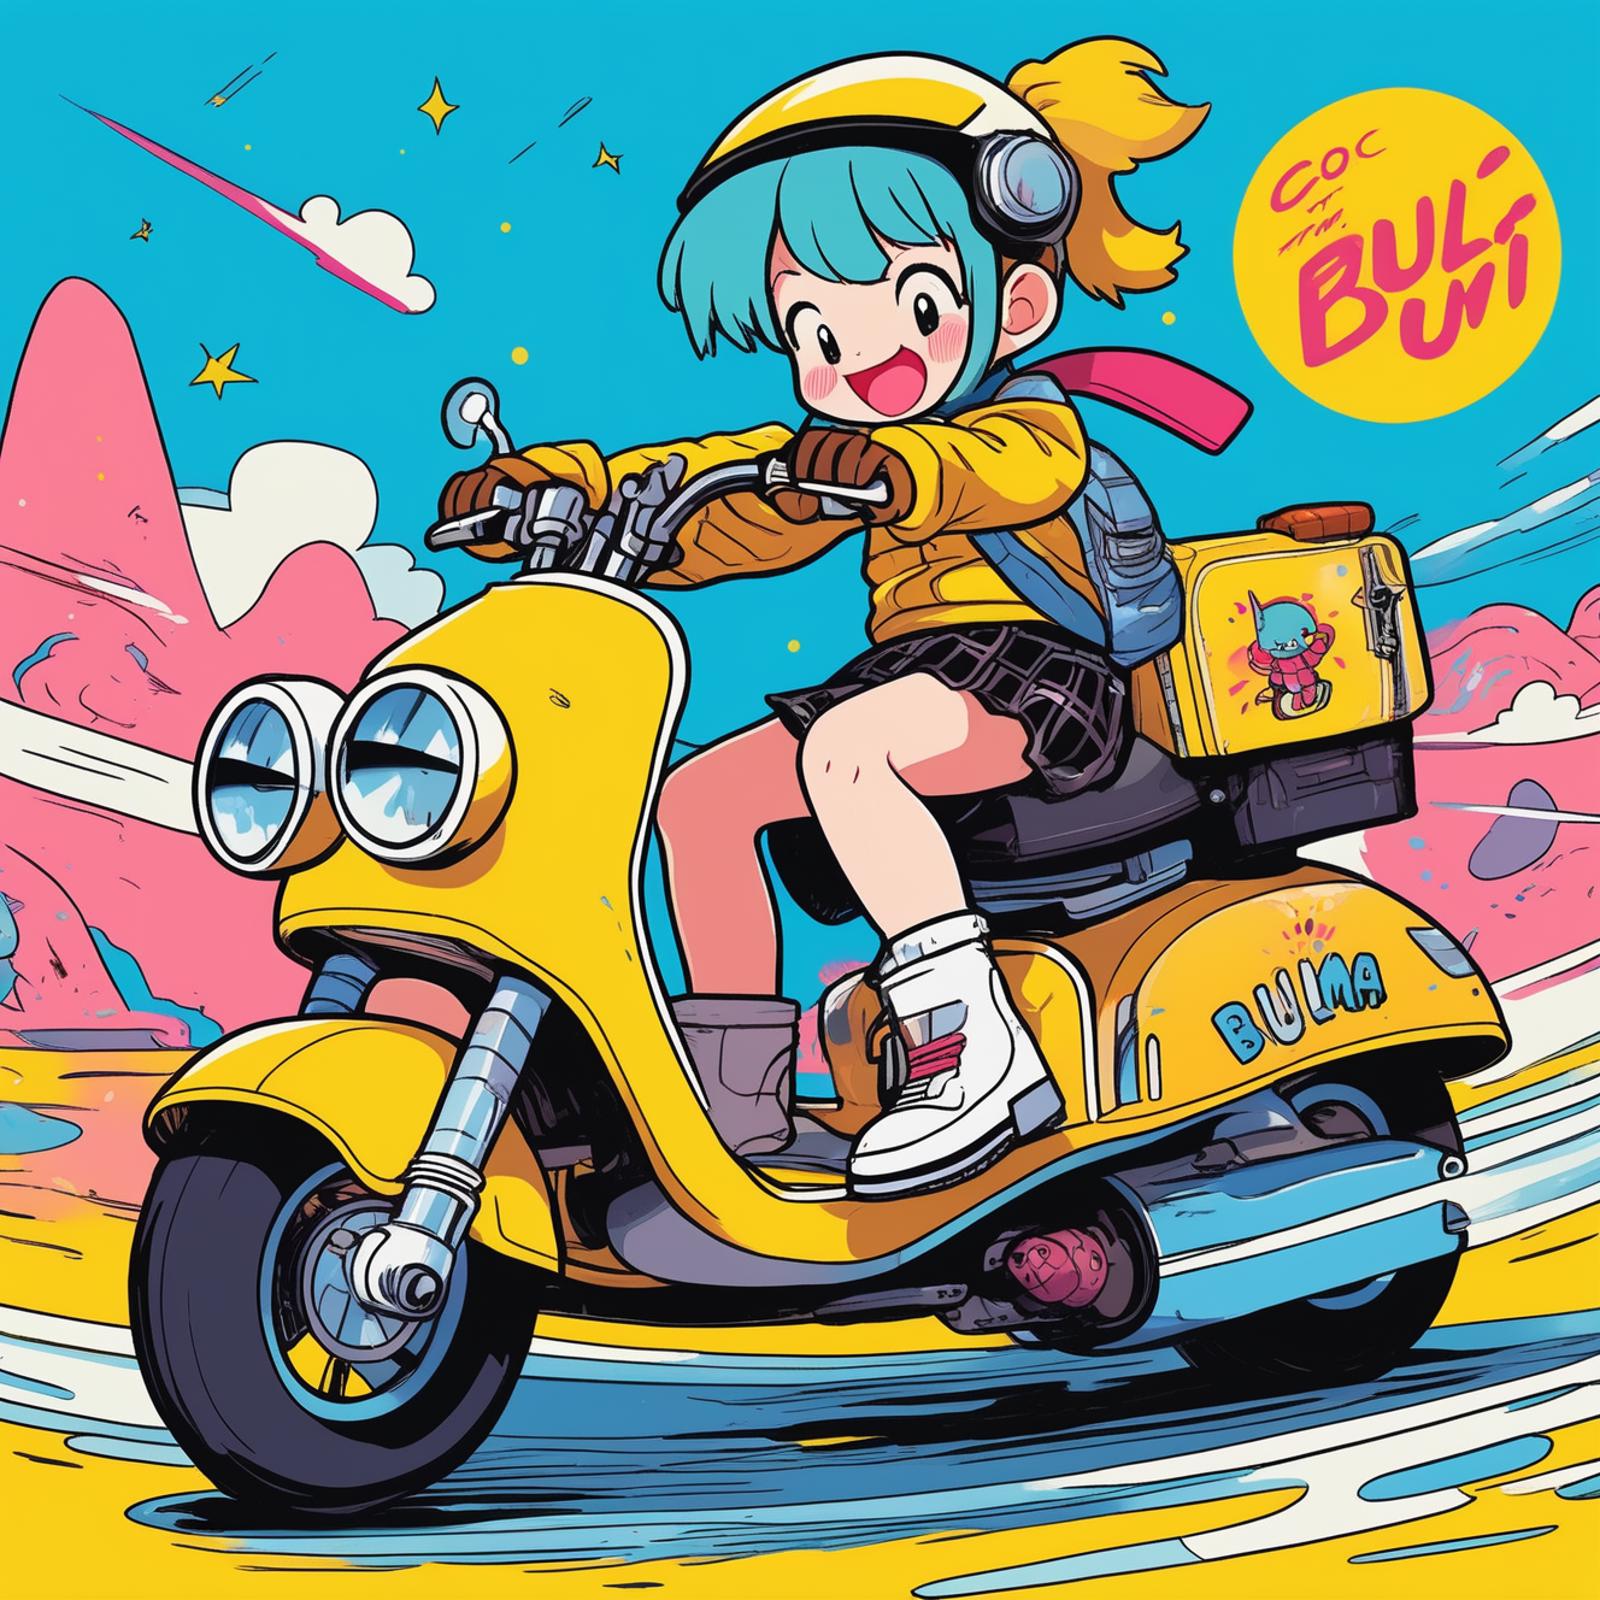 A cartoon girl riding a yellow scooter with a backpack on.